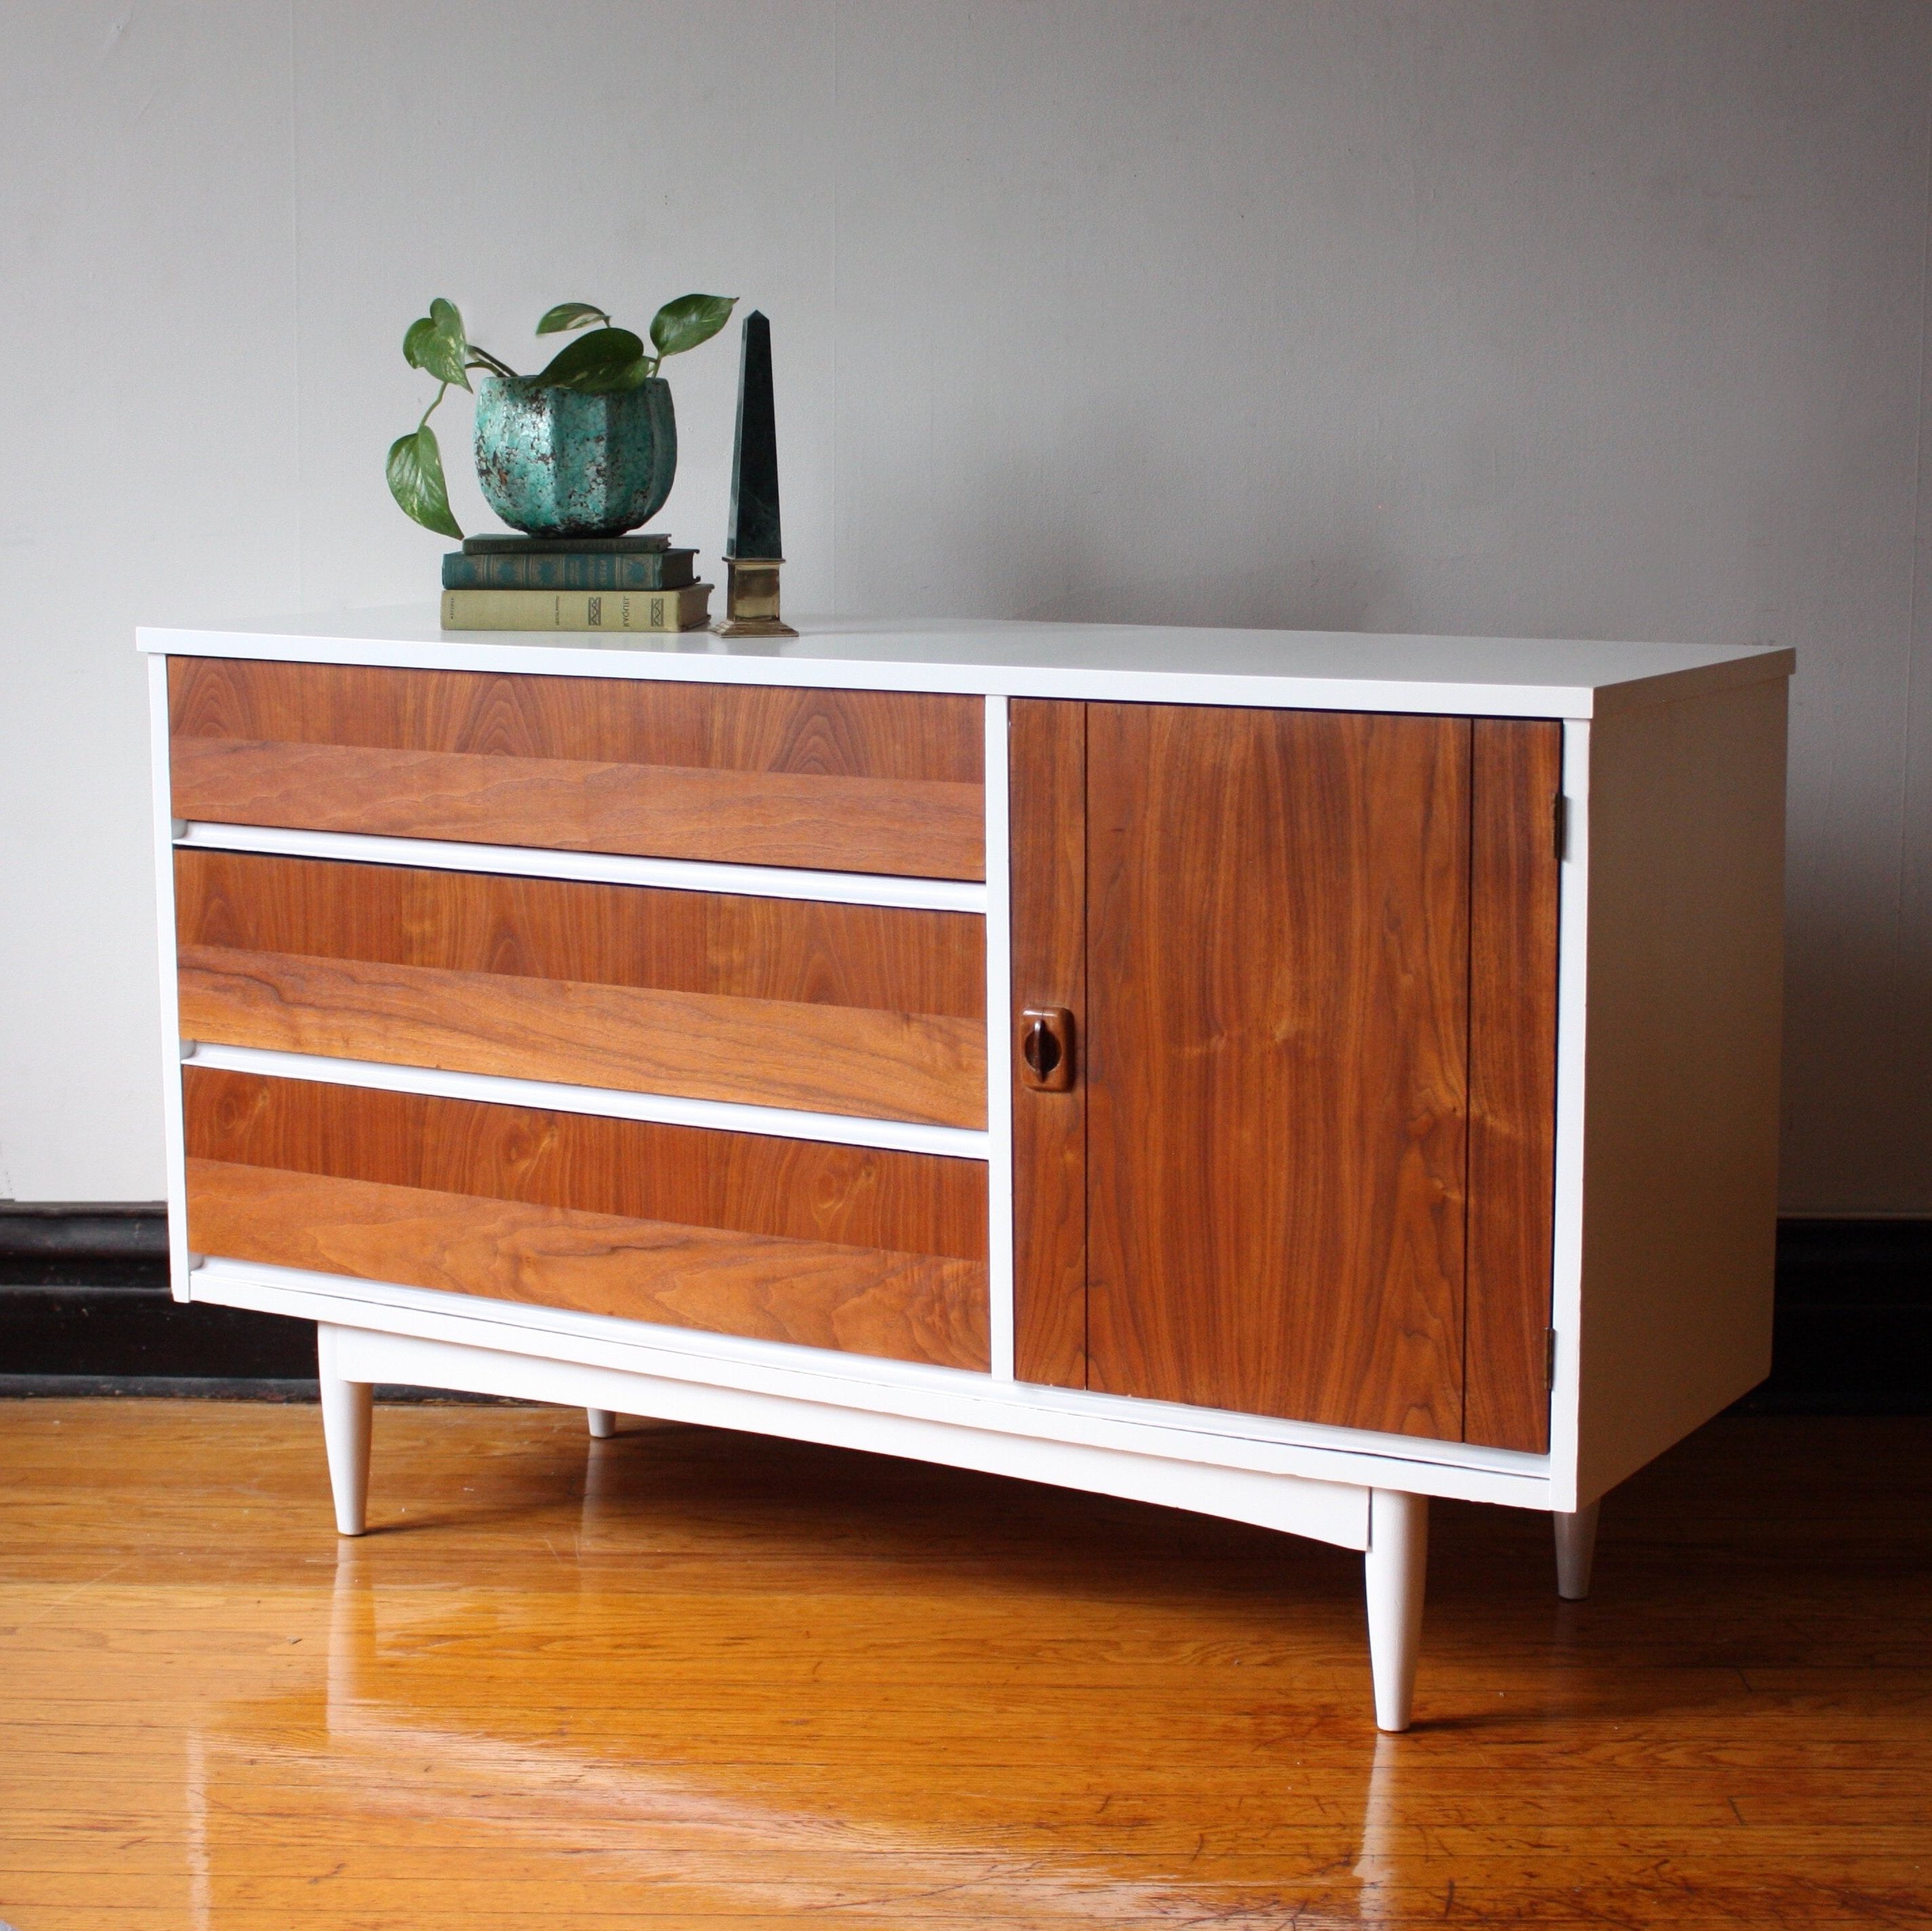 Soldwhite And Wood Mid Century Modern Credenza//mcm Media – Etsy In Mid Century Modern White Sideboards (Gallery 8 of 20)